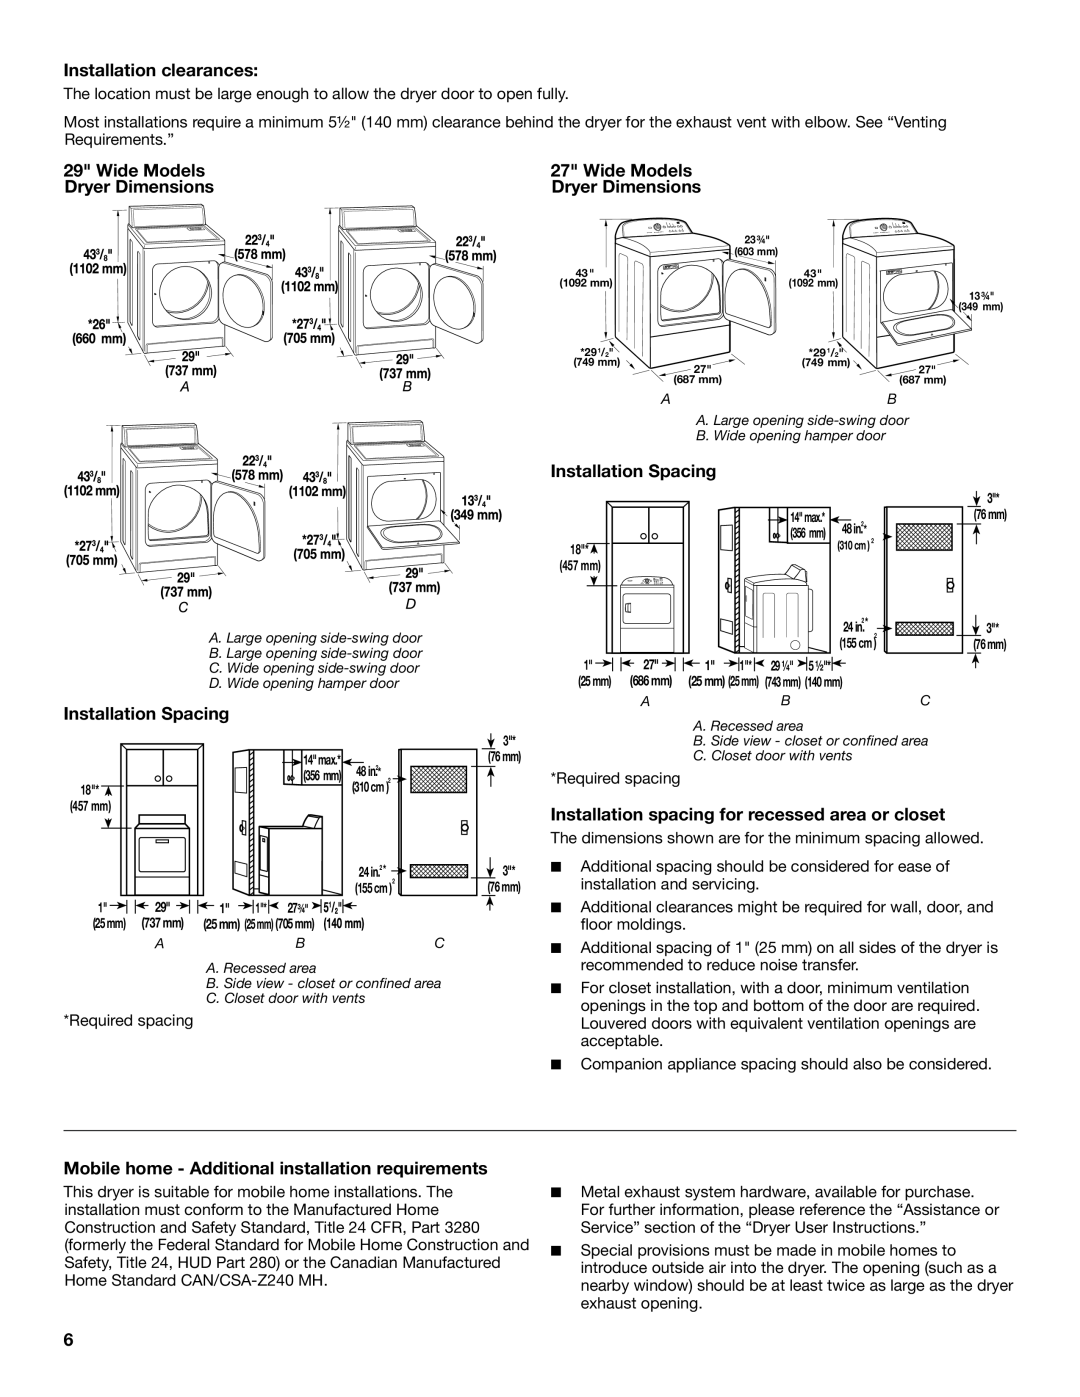 Maytag W10097000A-SP, W10096984A, MGDX600XW Installation clearances, Wide Models Dryer Dimensions, Installation Spacing 